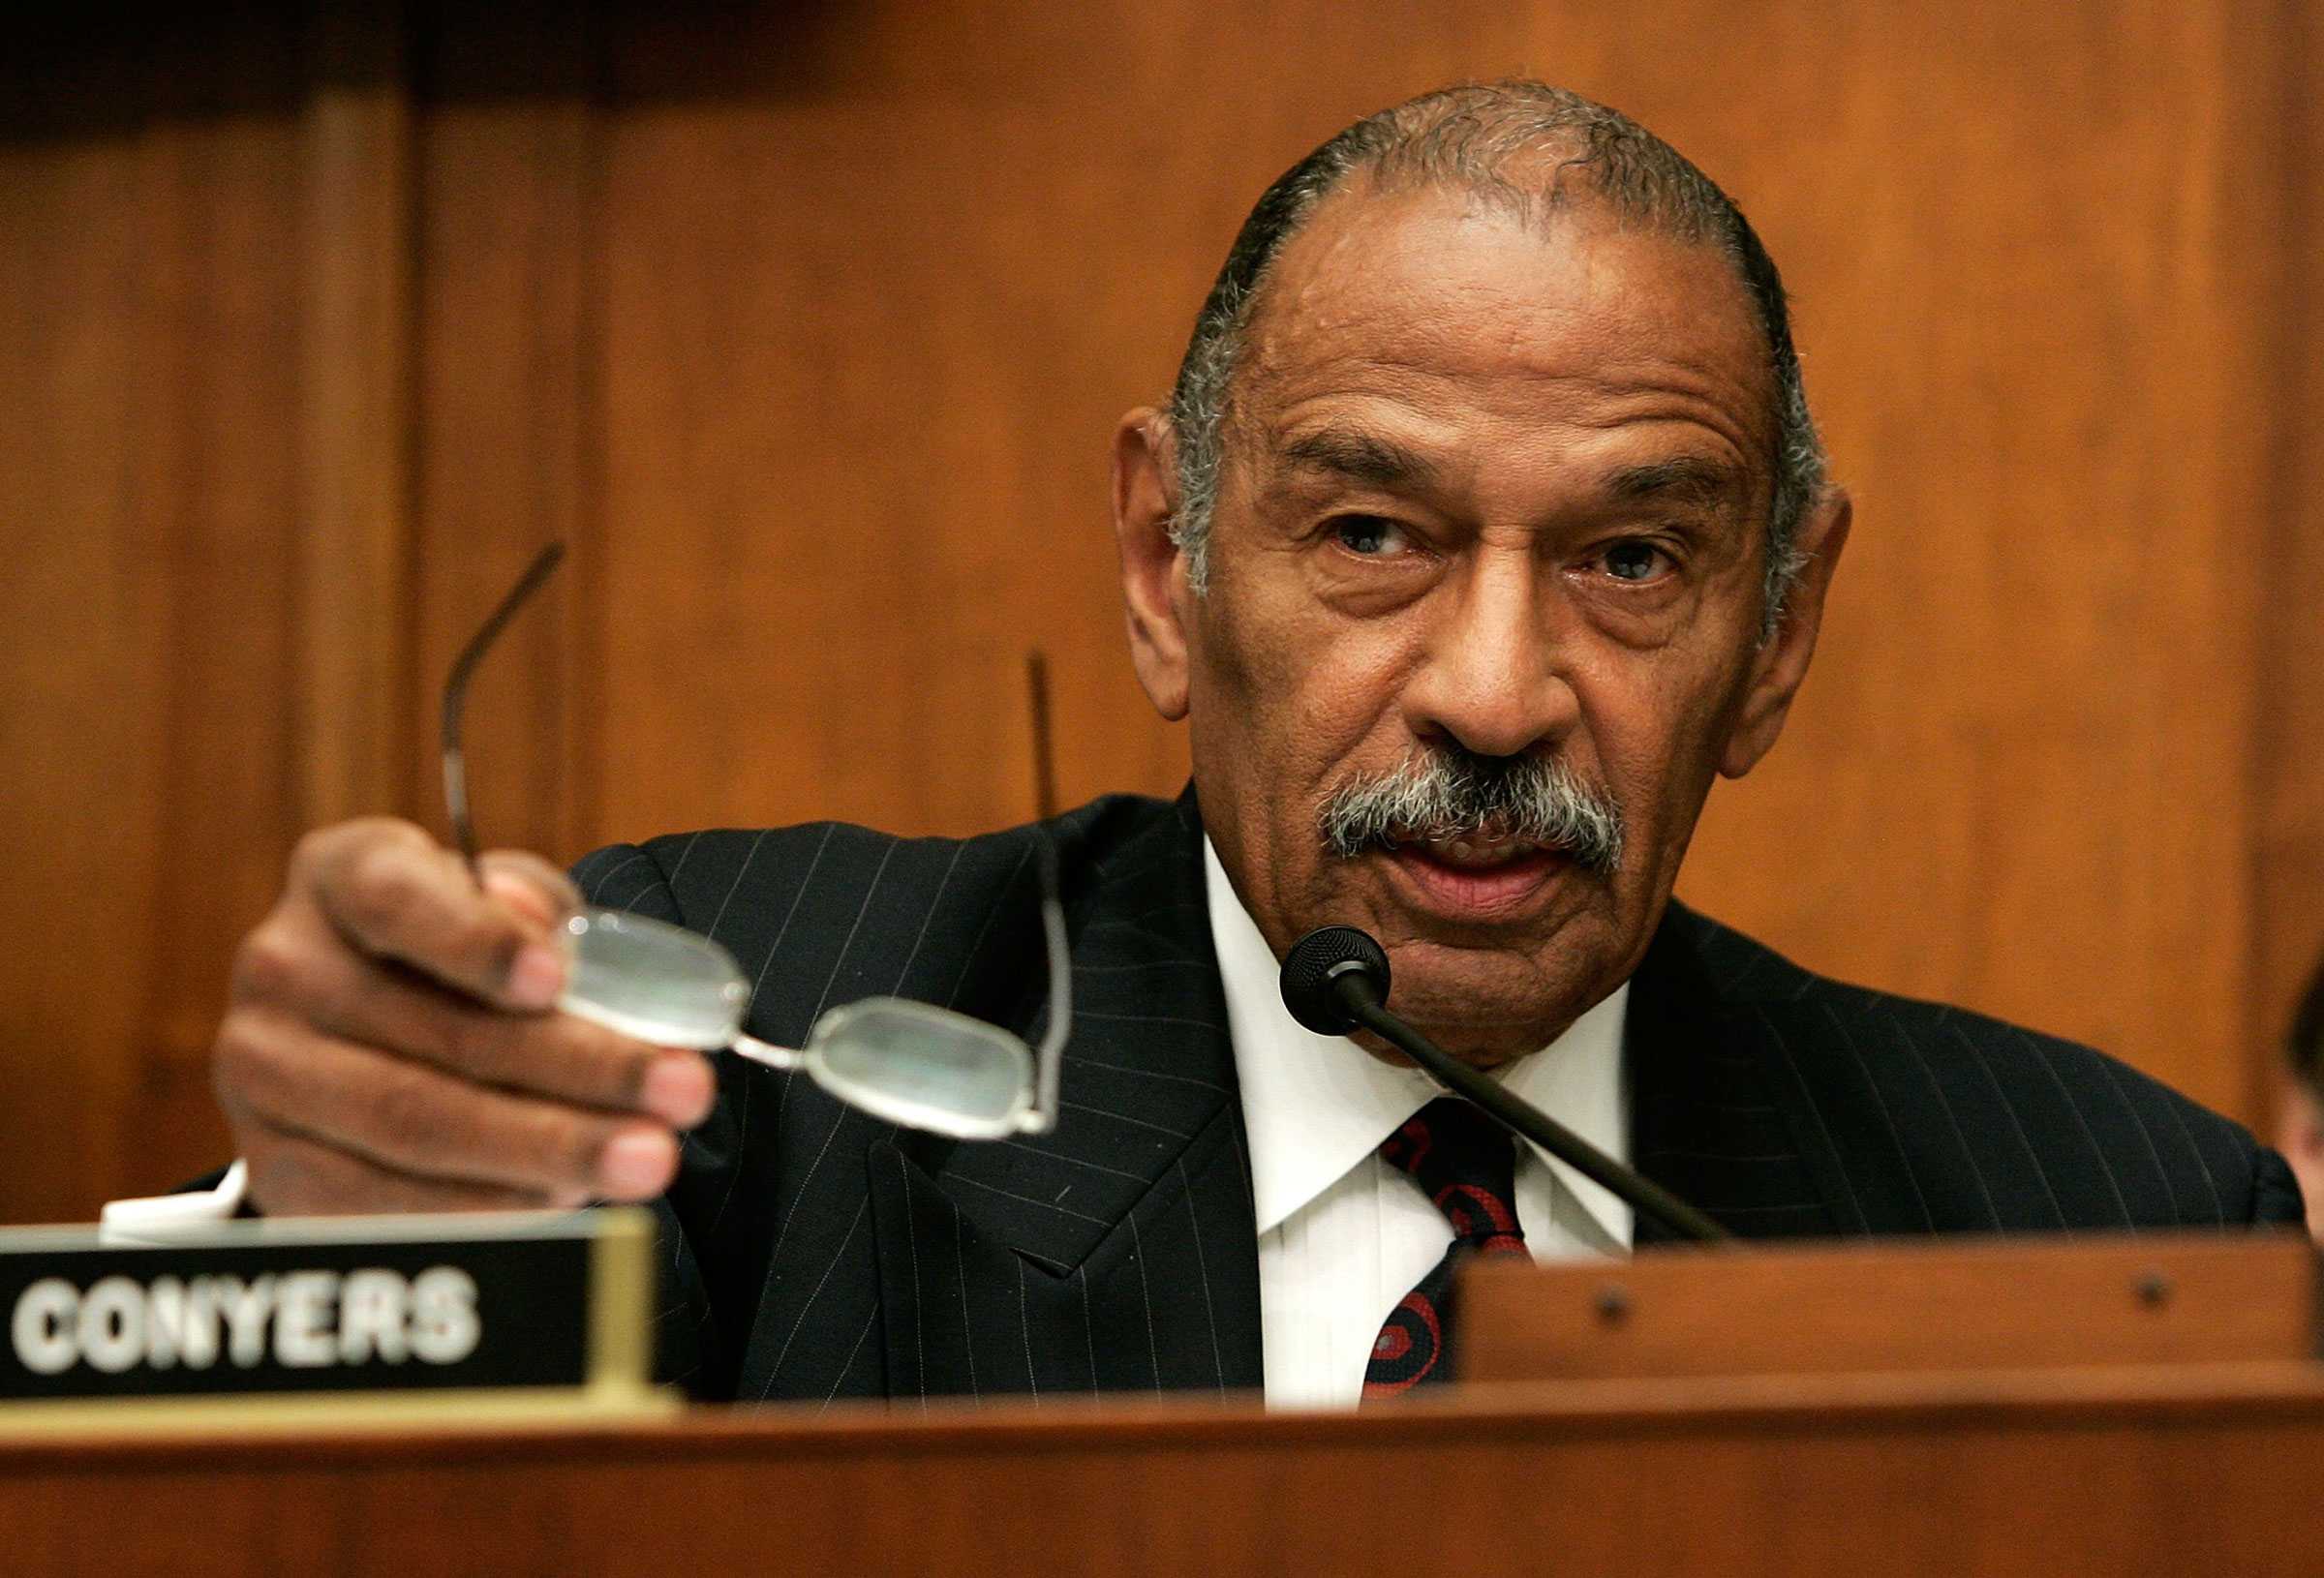 A close up photo of John Conyers talking. He is speaking have and have taken off his glasses.